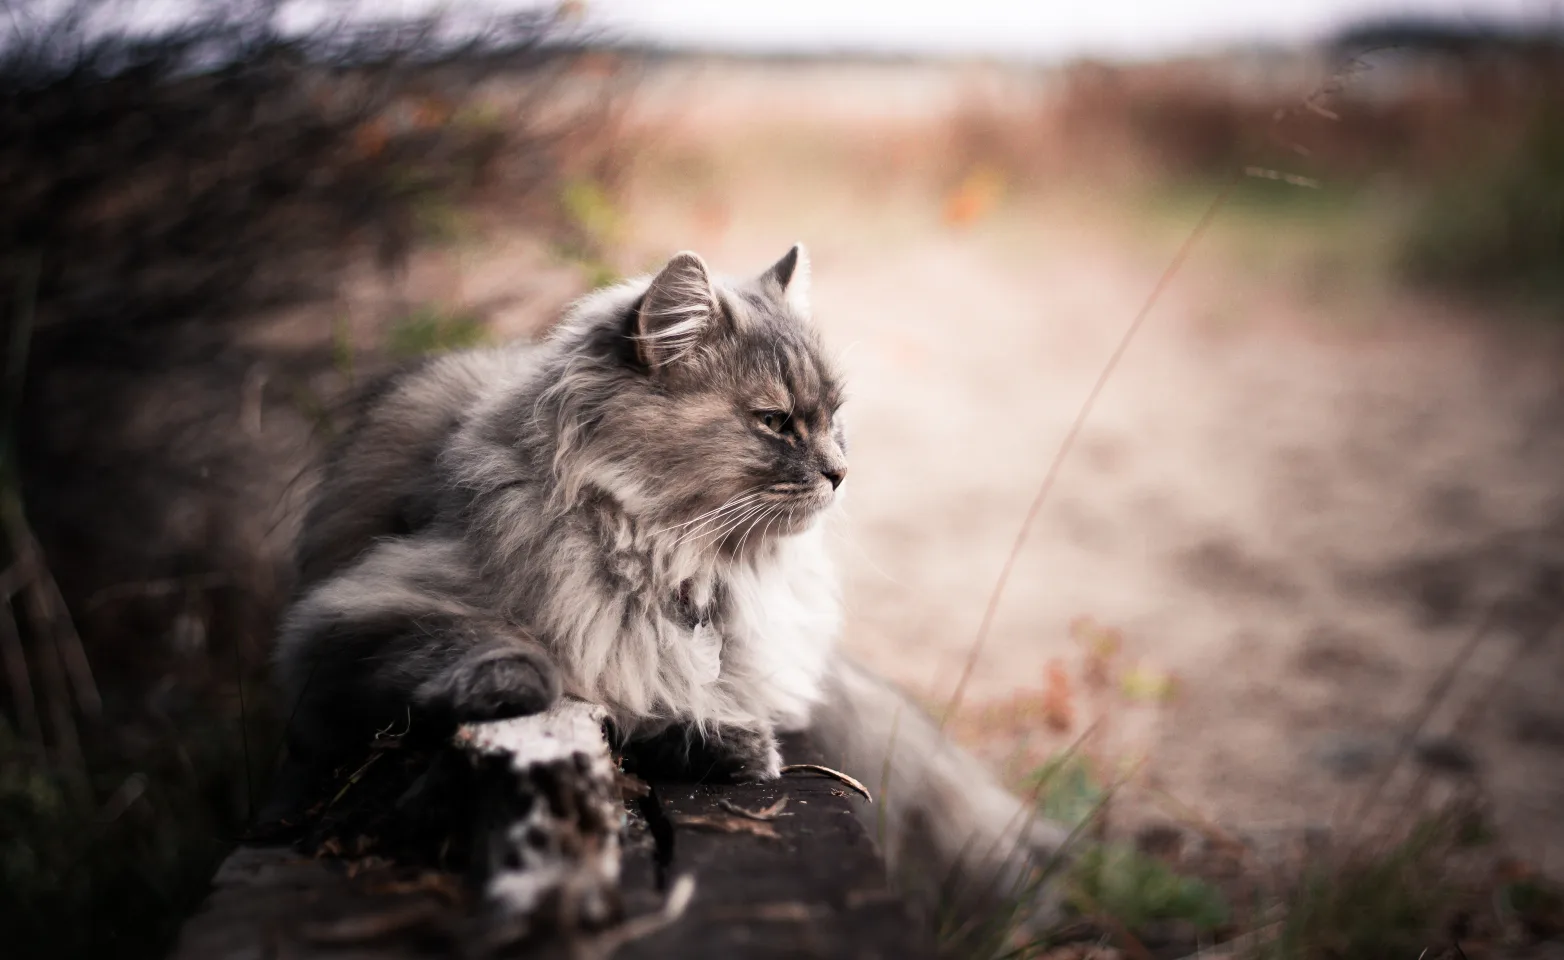 Fluffy grey cat is laying on a rock in a grassy hey field.